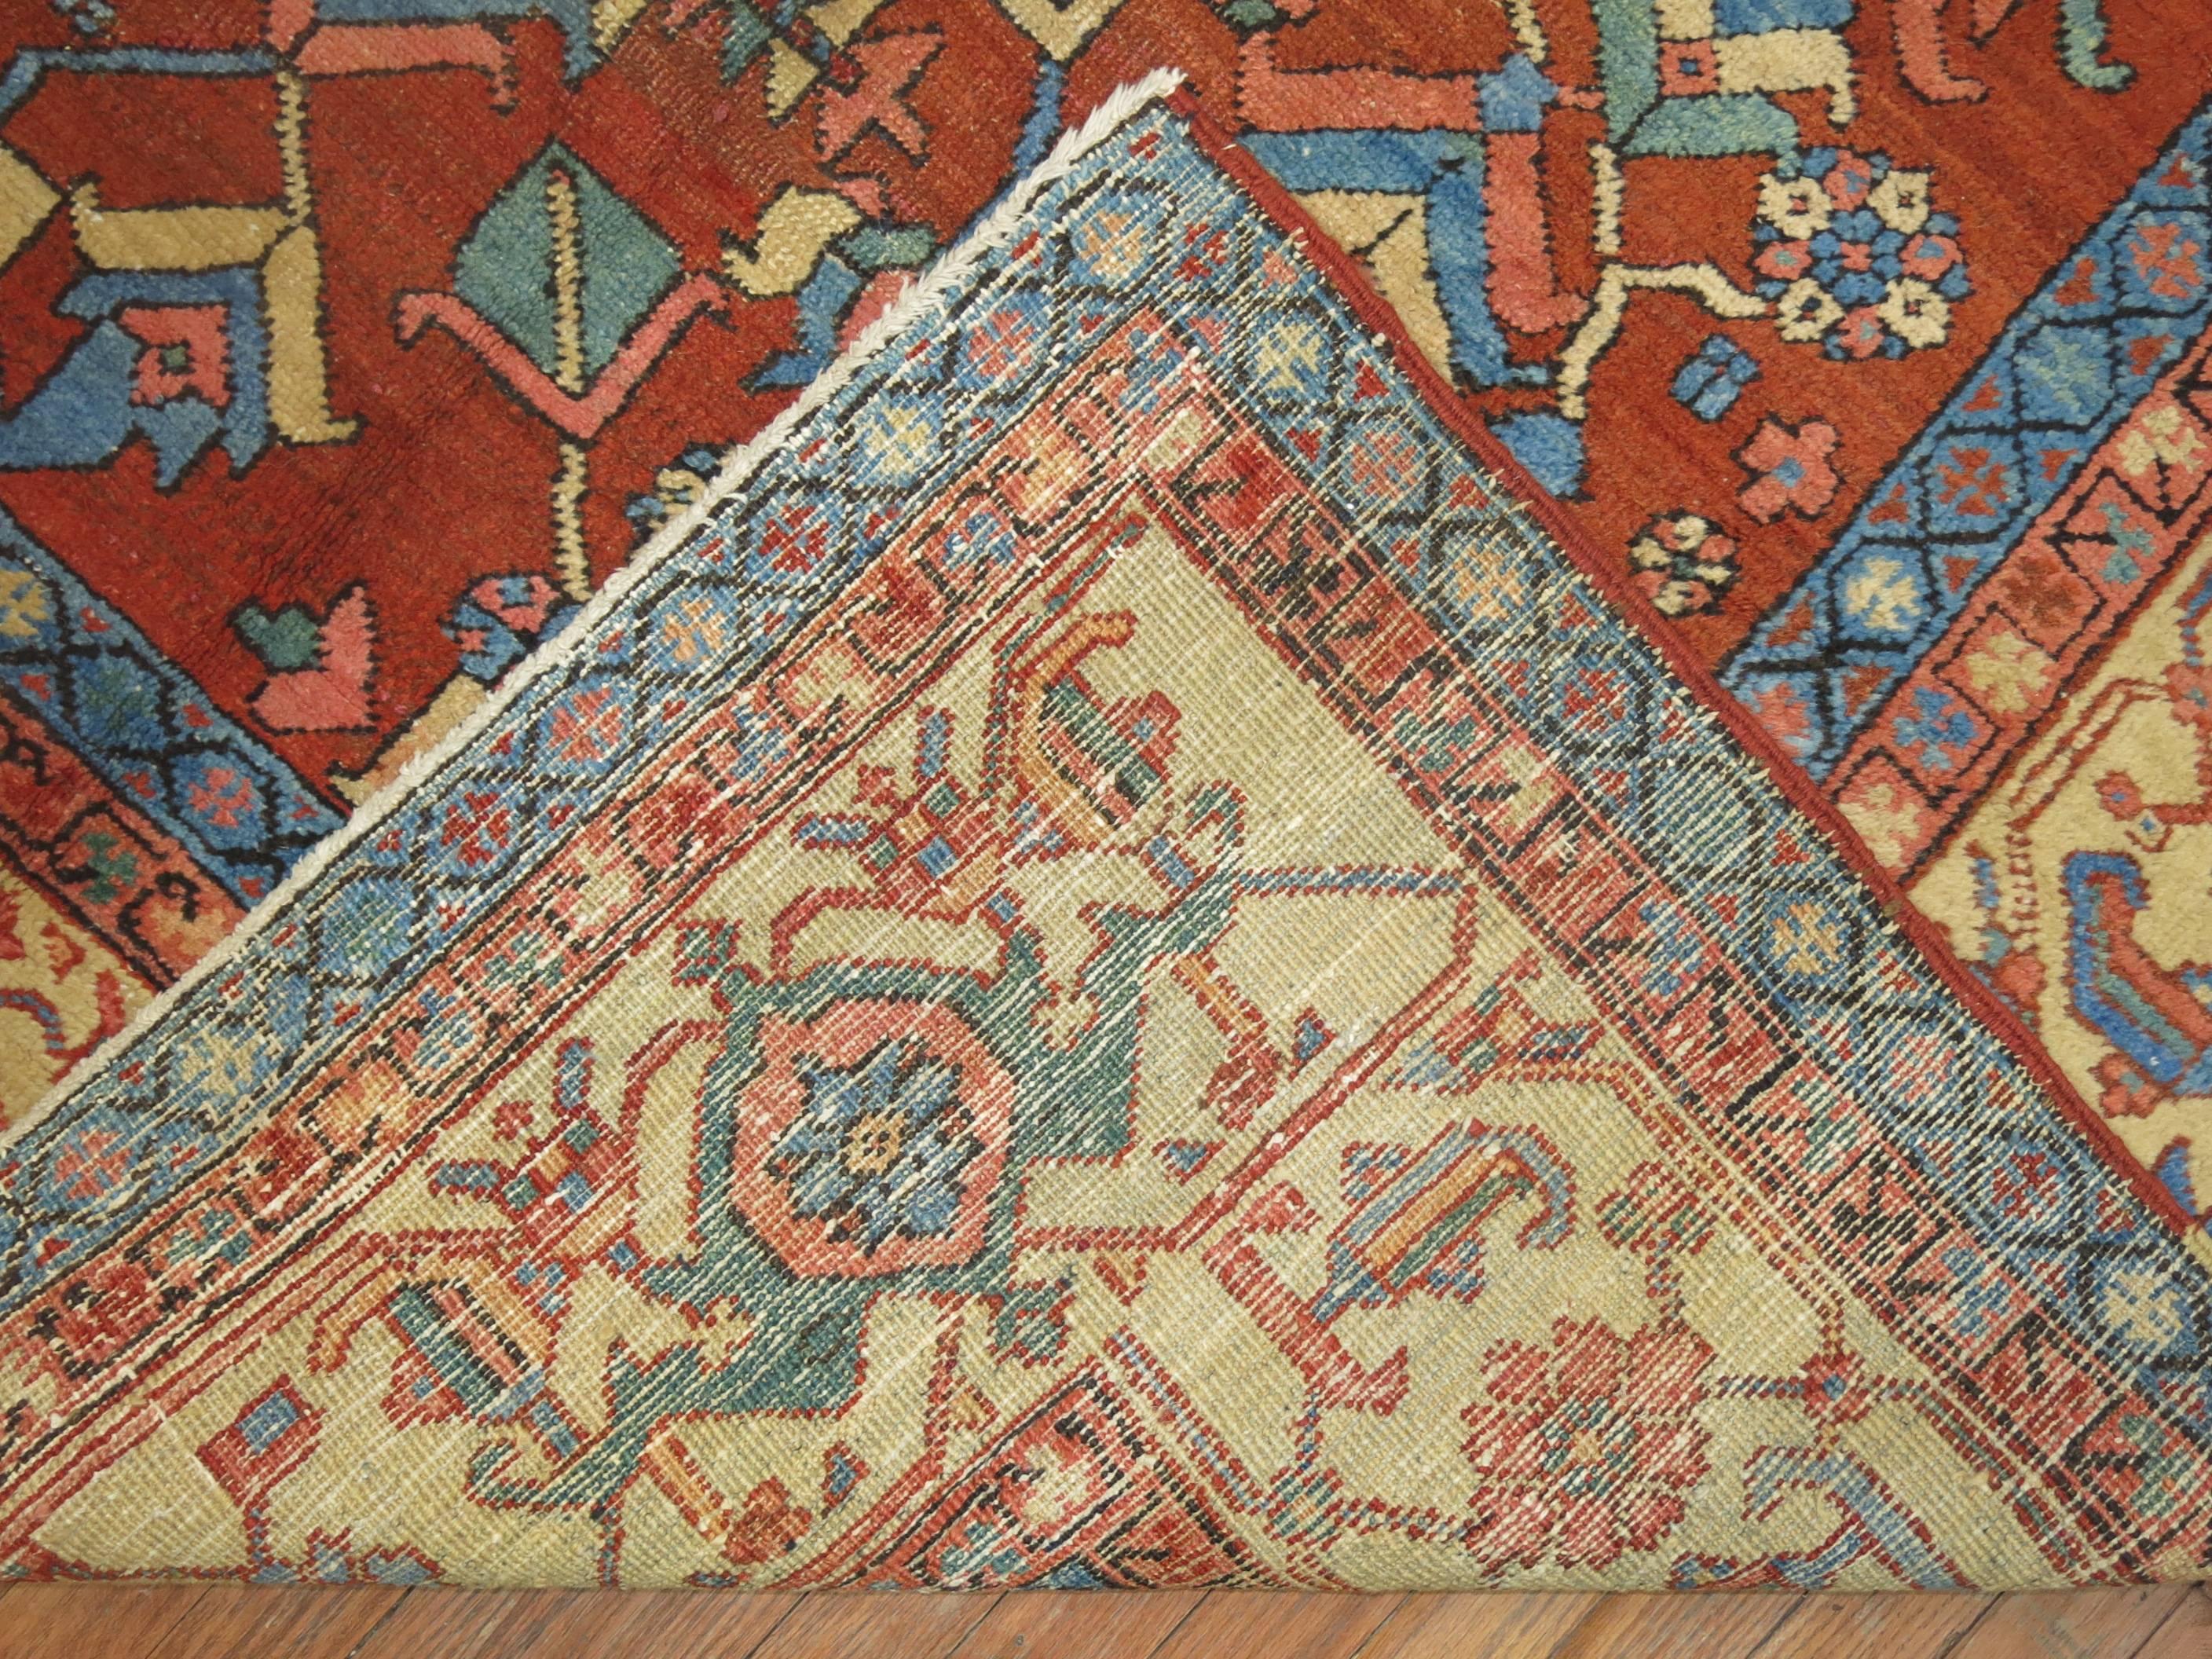 Early 20th century Serapi Heriz rug with cream border, accents in robin egg blues, celery green, teals, terracotta on a brick colored field,

circa 1920. Measures: 9'7